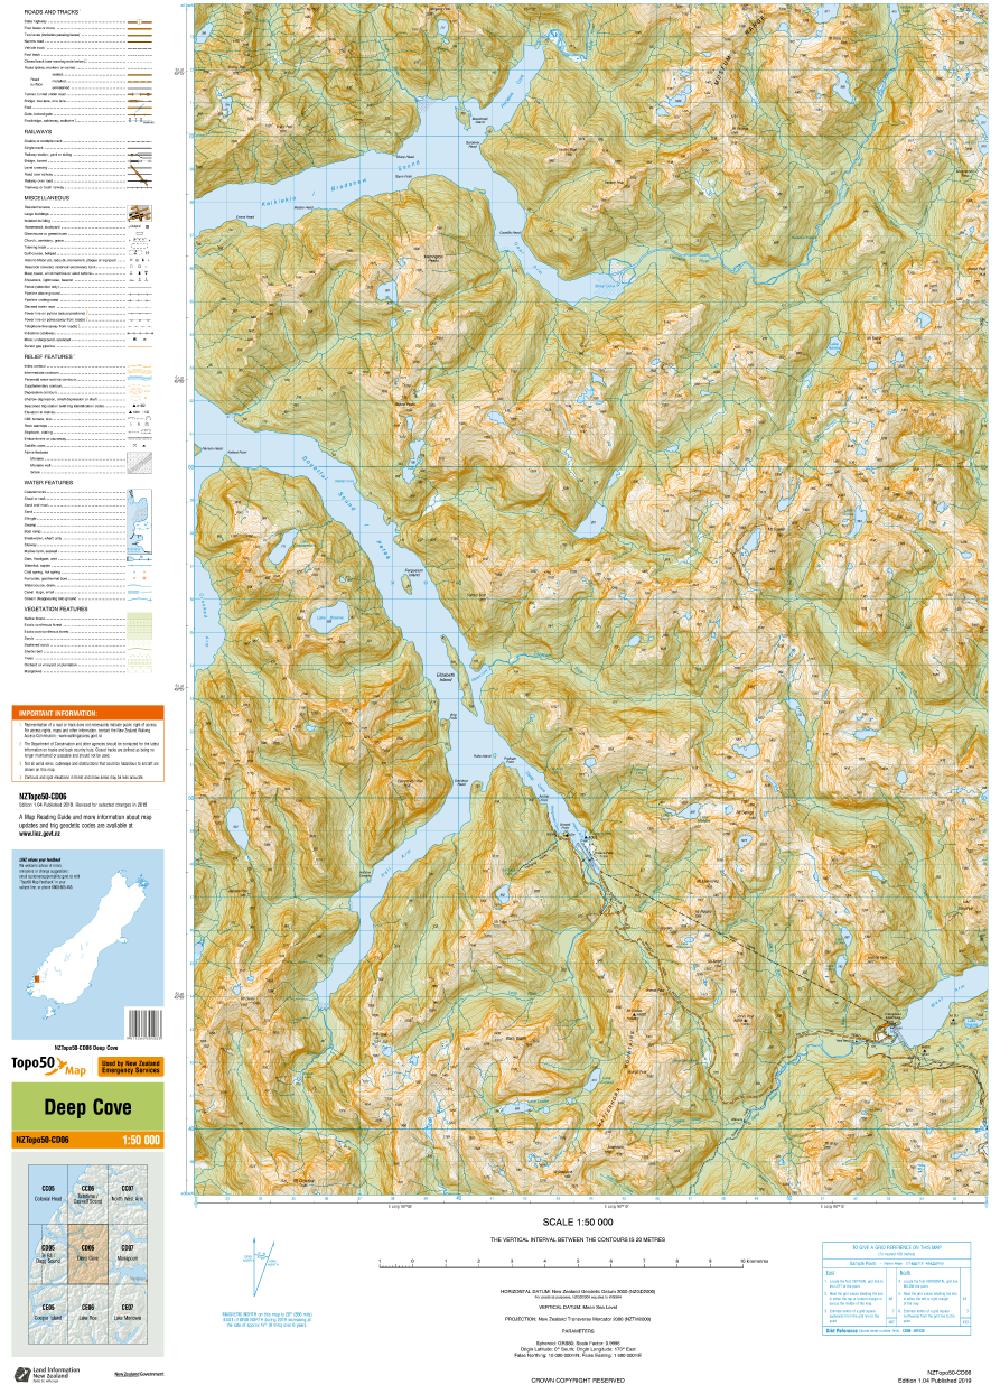 Topo map of Deep Cove